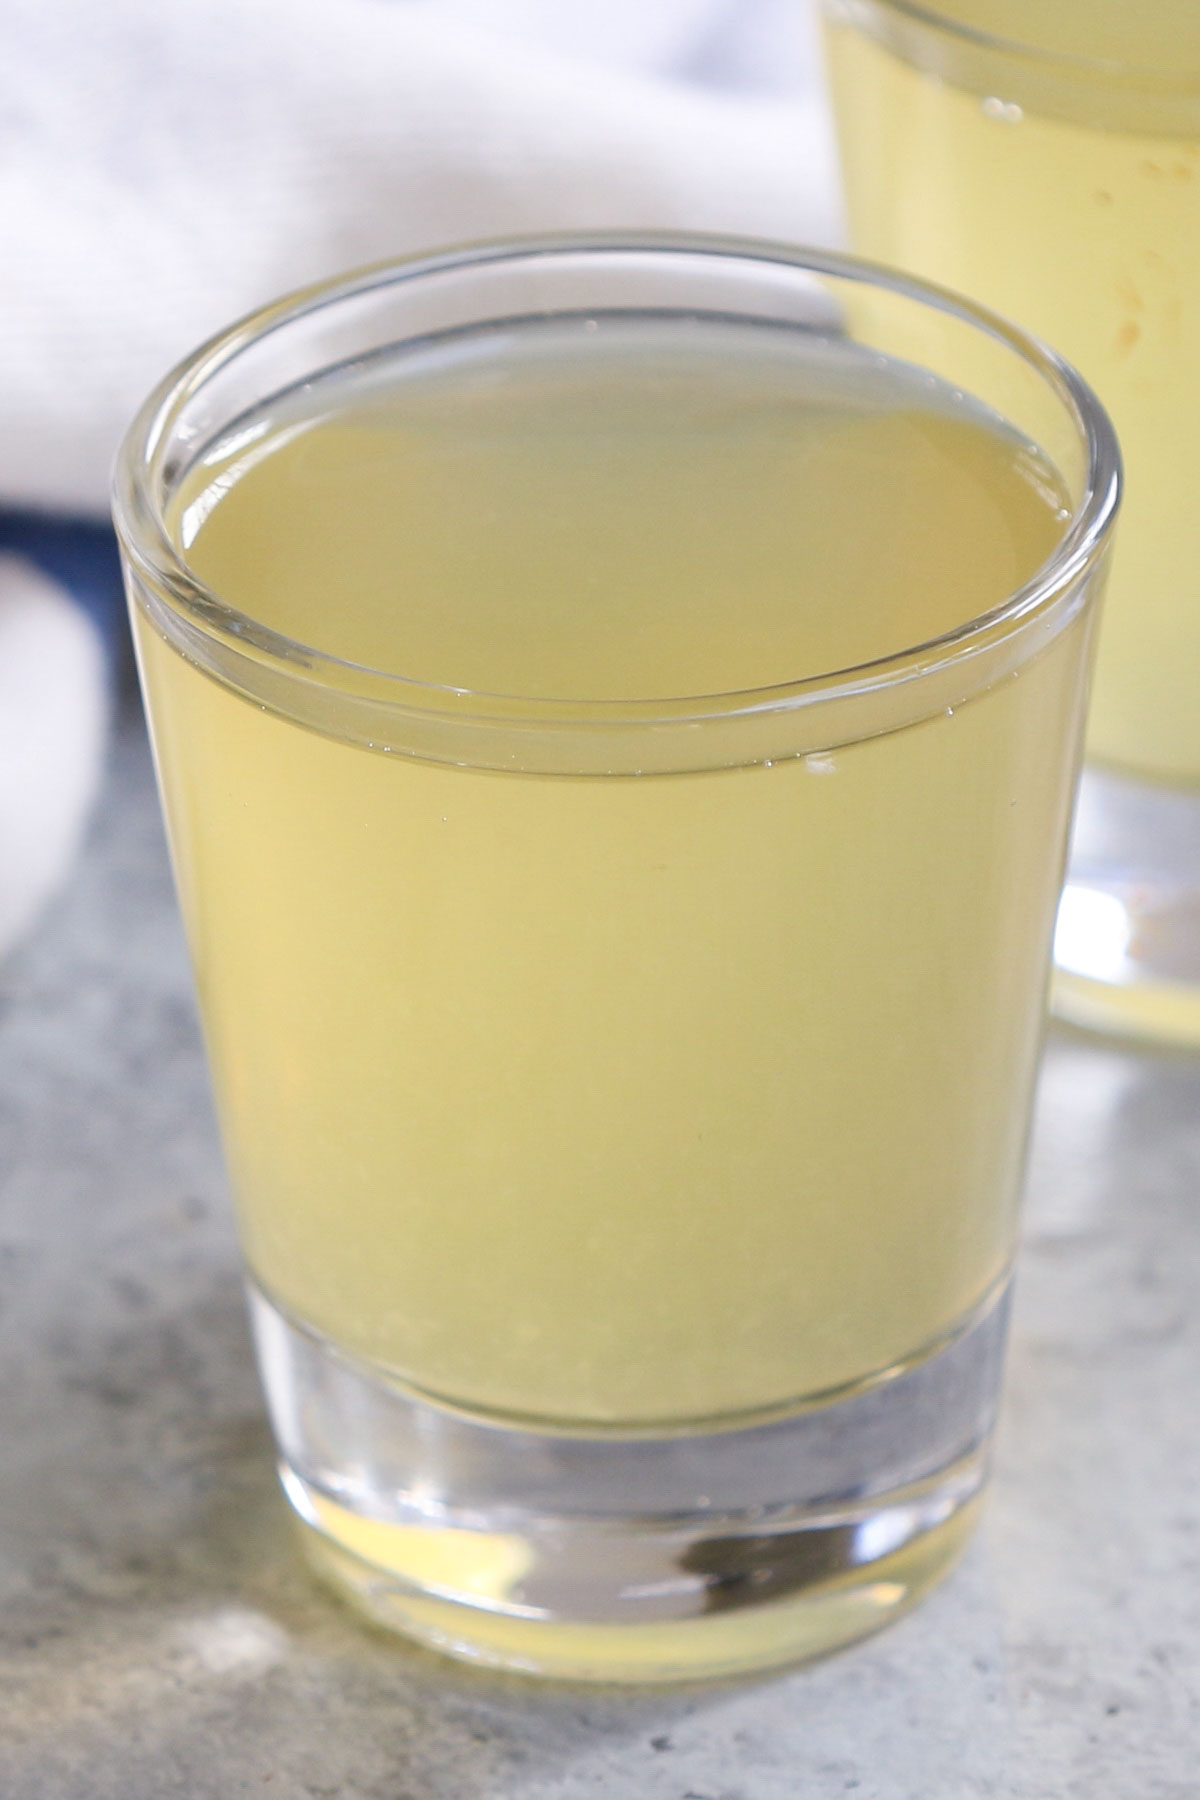 Apple Cider Vinegar Shots (aka. ACV Shots) are sweet and sour, with a ton of health benefits, as well as with weight loss. Ever wonder whether this detox drink actually works, or how many shots of apple cider vinegar do you need to drink a day? Keep reading to find out what the scientific research says.